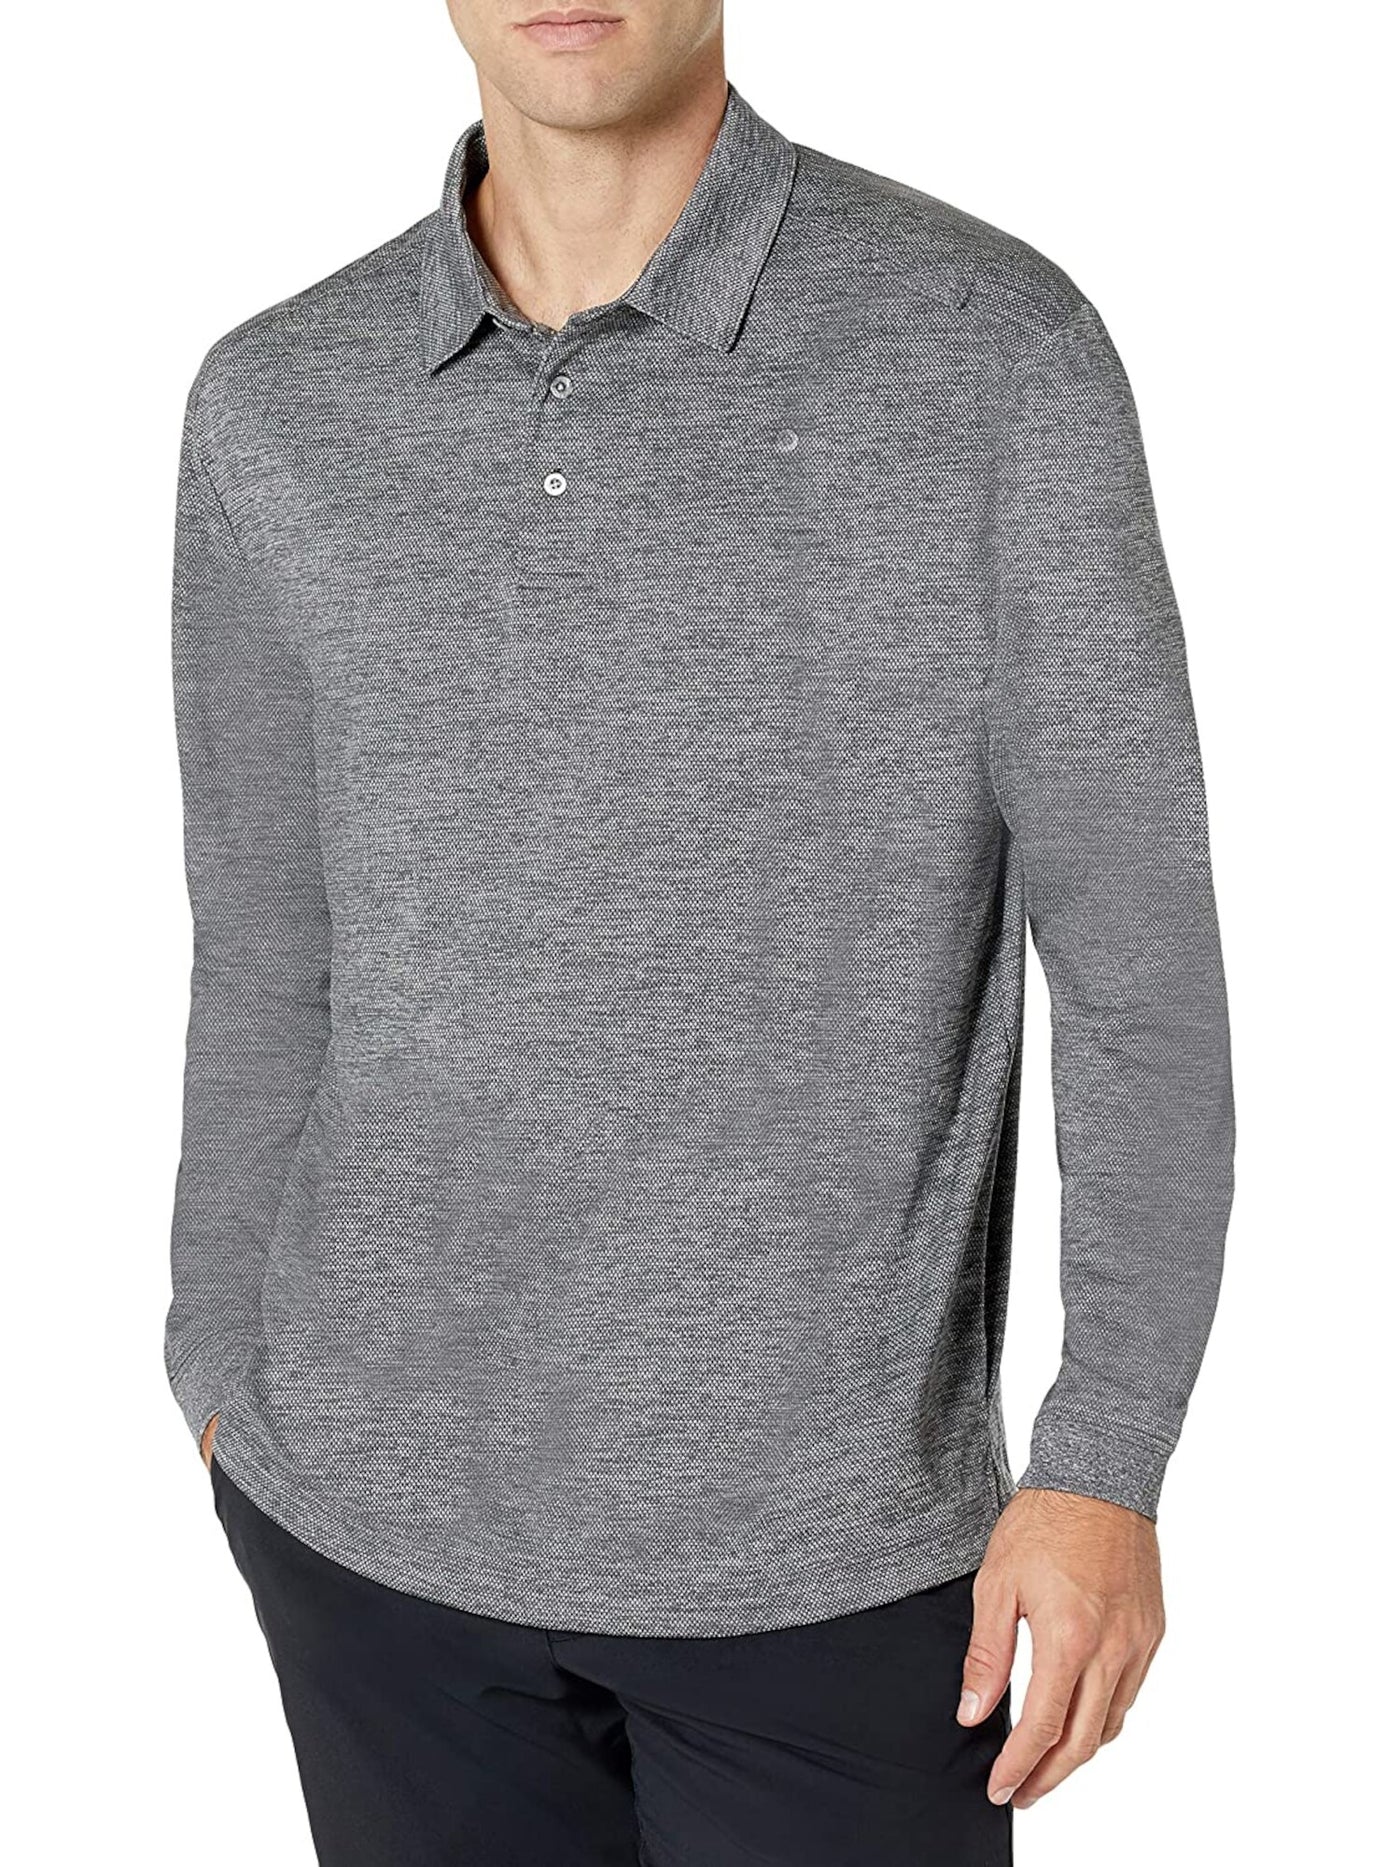 HYBRID APPAREL Mens Gray Classic Fit Polo S